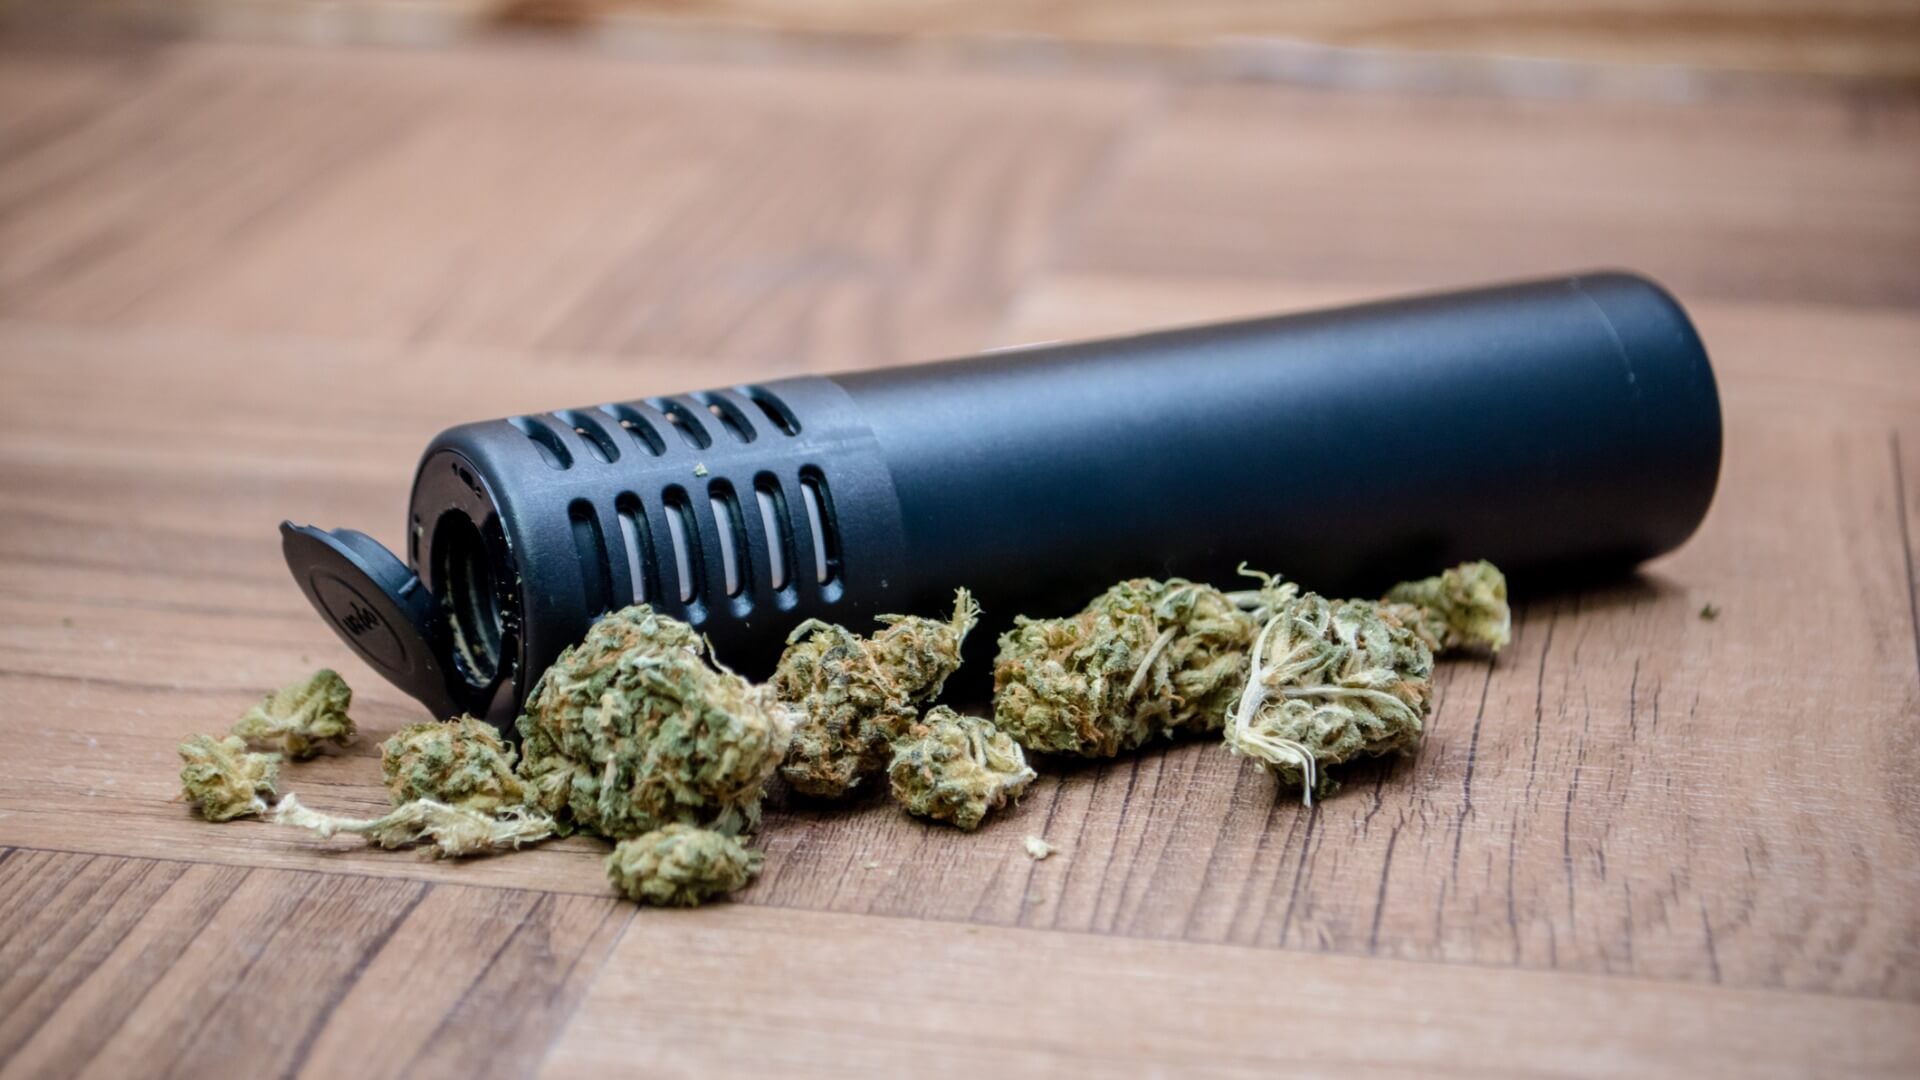 weed vaporizer and cannabis around it